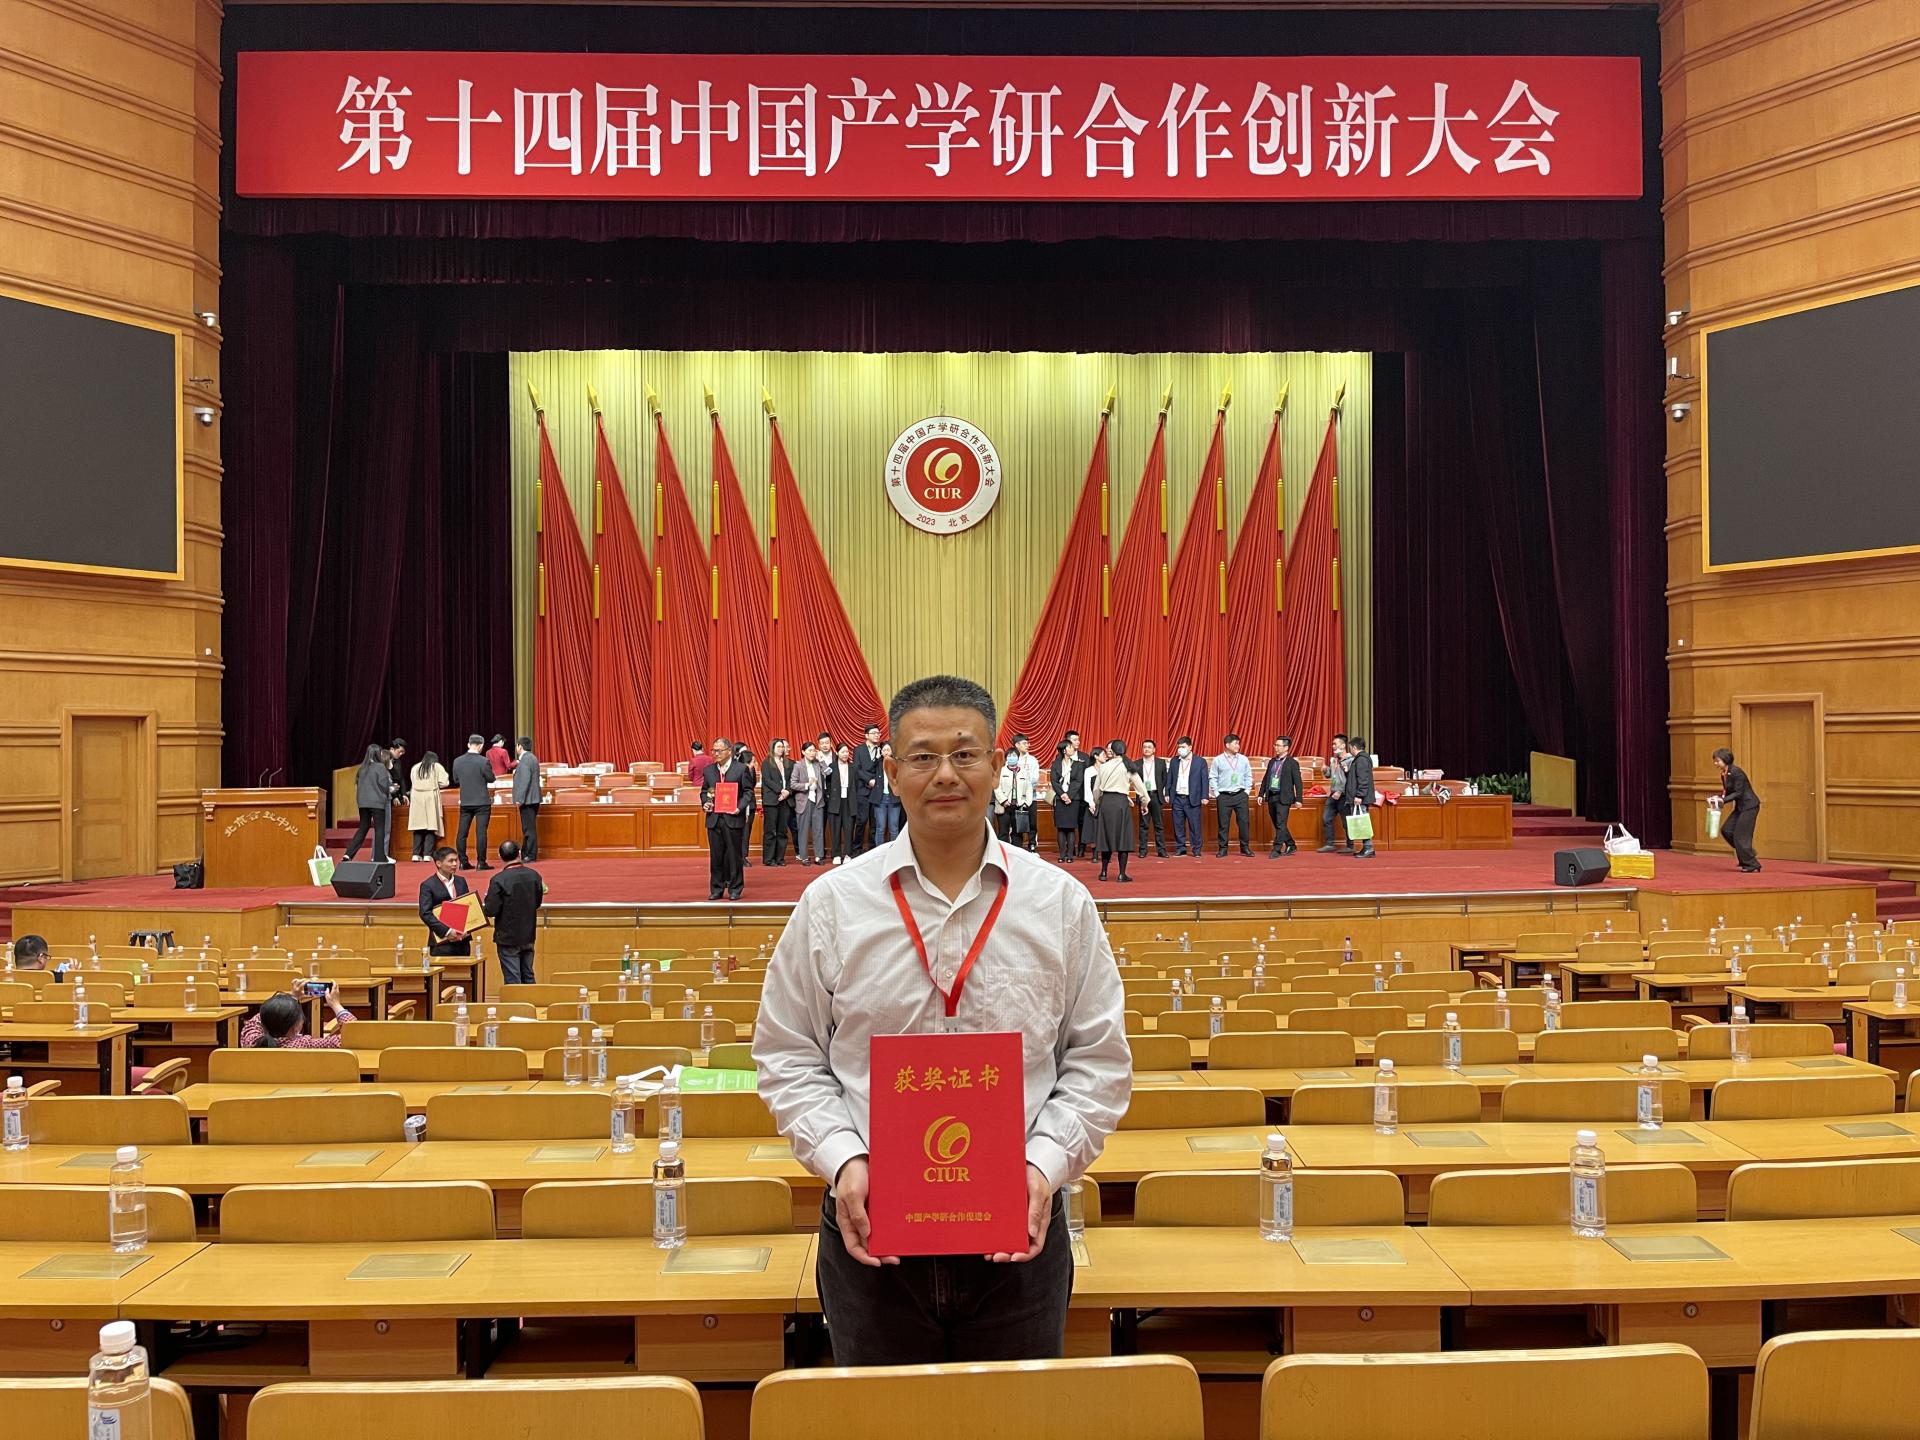 SUSTech’s Chenglong FU wins multiple awards for technology application projects